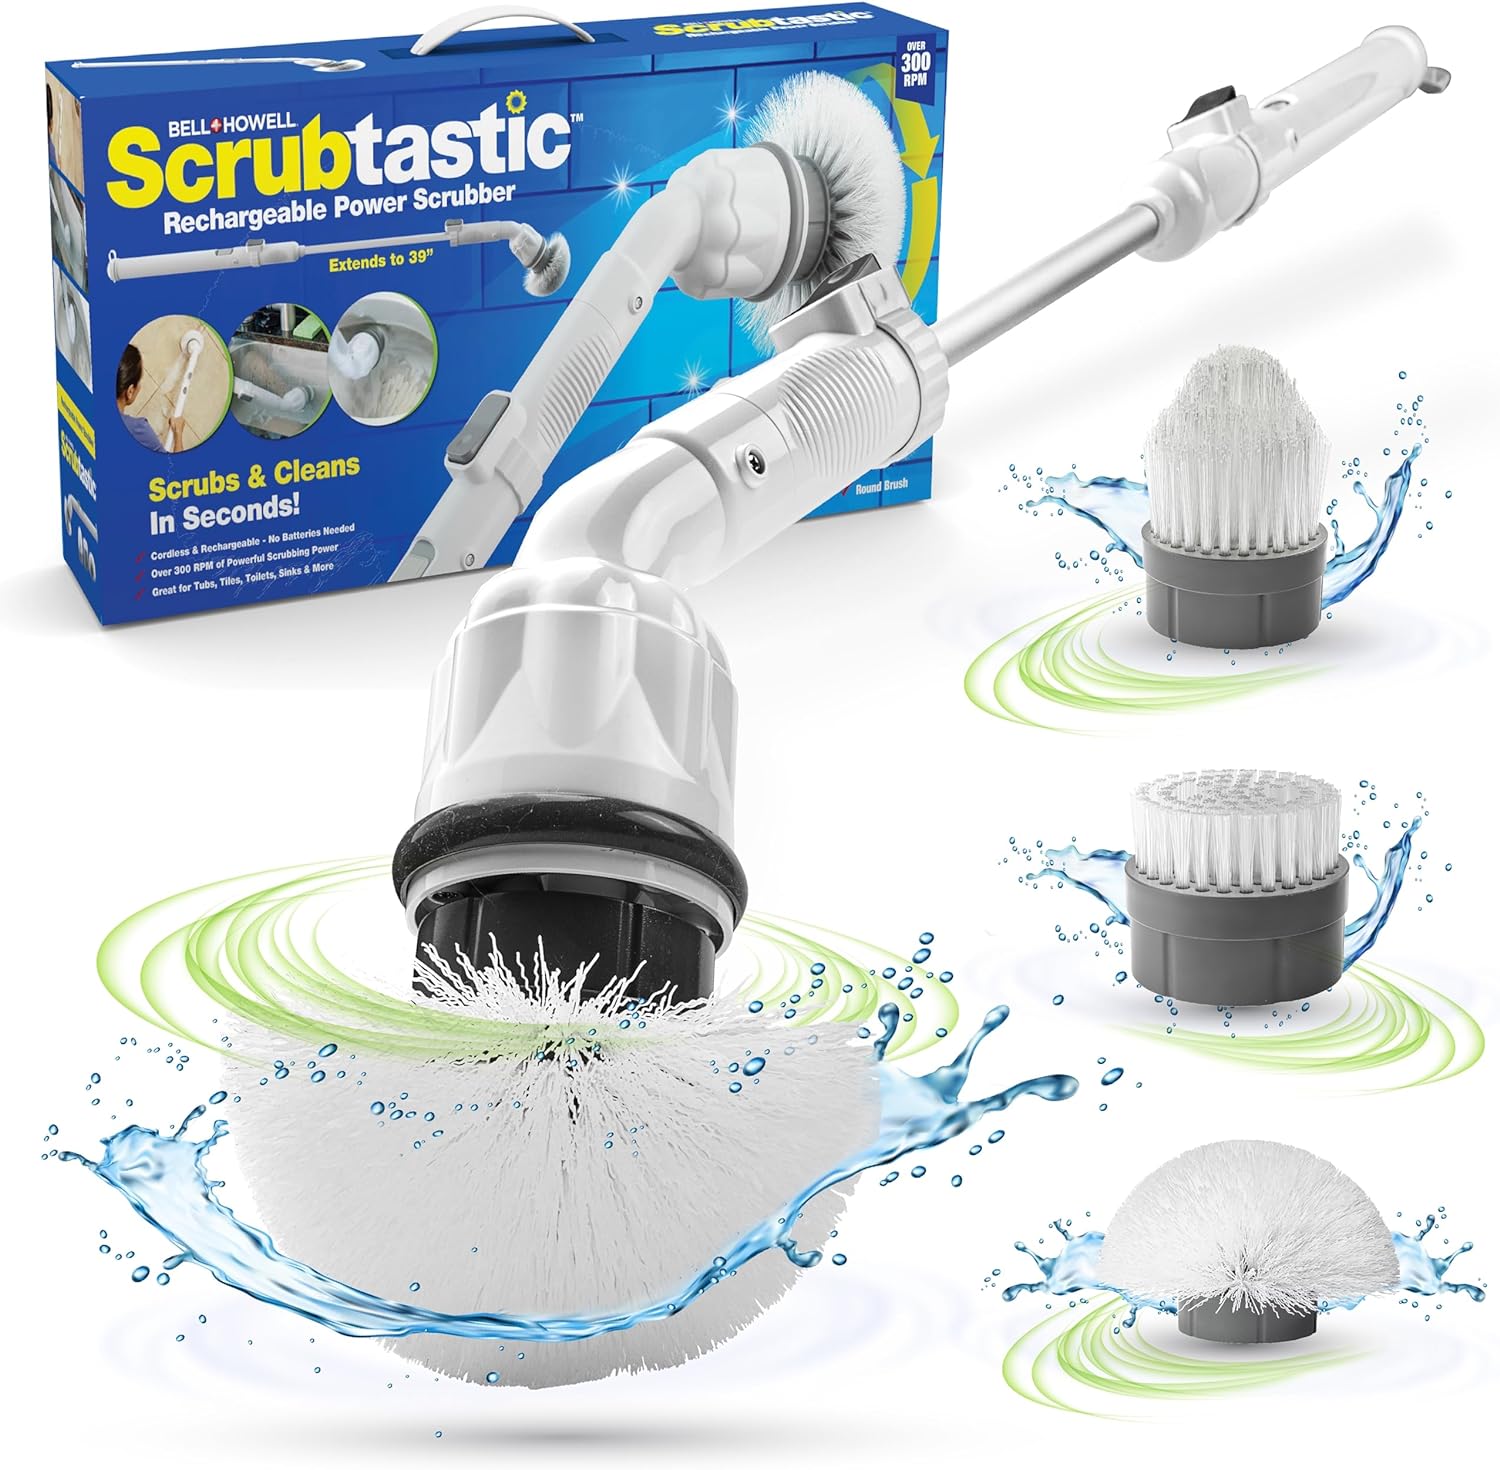 Scrubtastic Spin Scrubber – Rechargeable, Multipurpose Cordless Tile & Shower 360 Power Bathroom and Kitchen Cleaner with 3 Replaceable Rotating Brush Heads - image 1 of 8